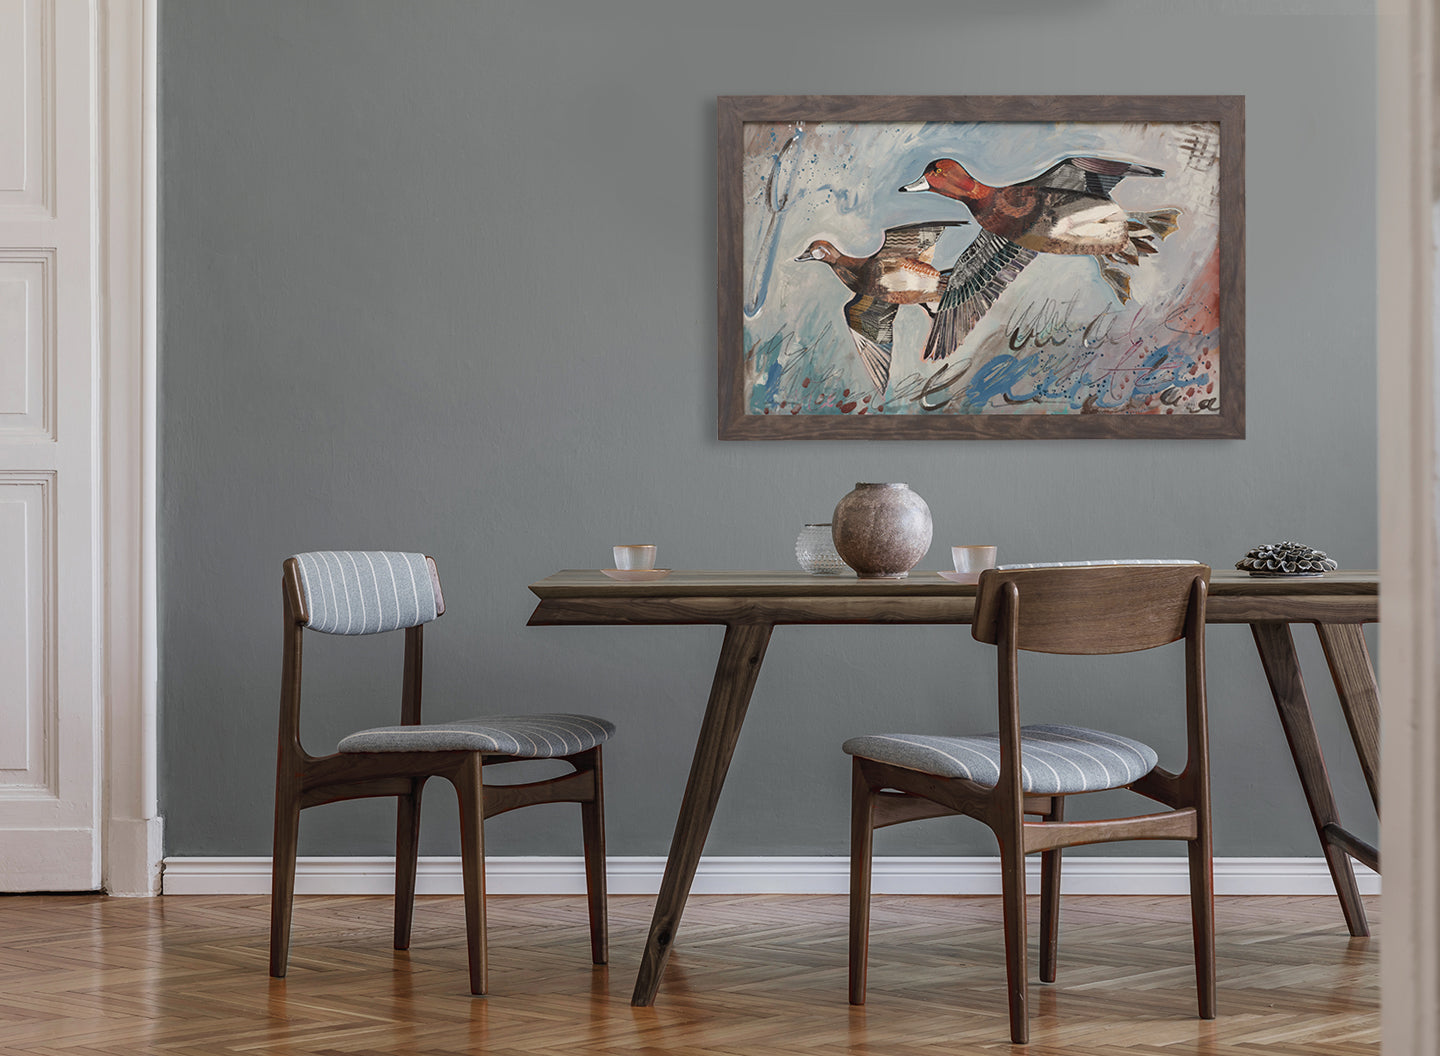 Dolan Geiman collage painting features redhead ducks in flight against an abstract backdrop of blue and grey hues. Rich, textured mixed media entitled Winter Redheads